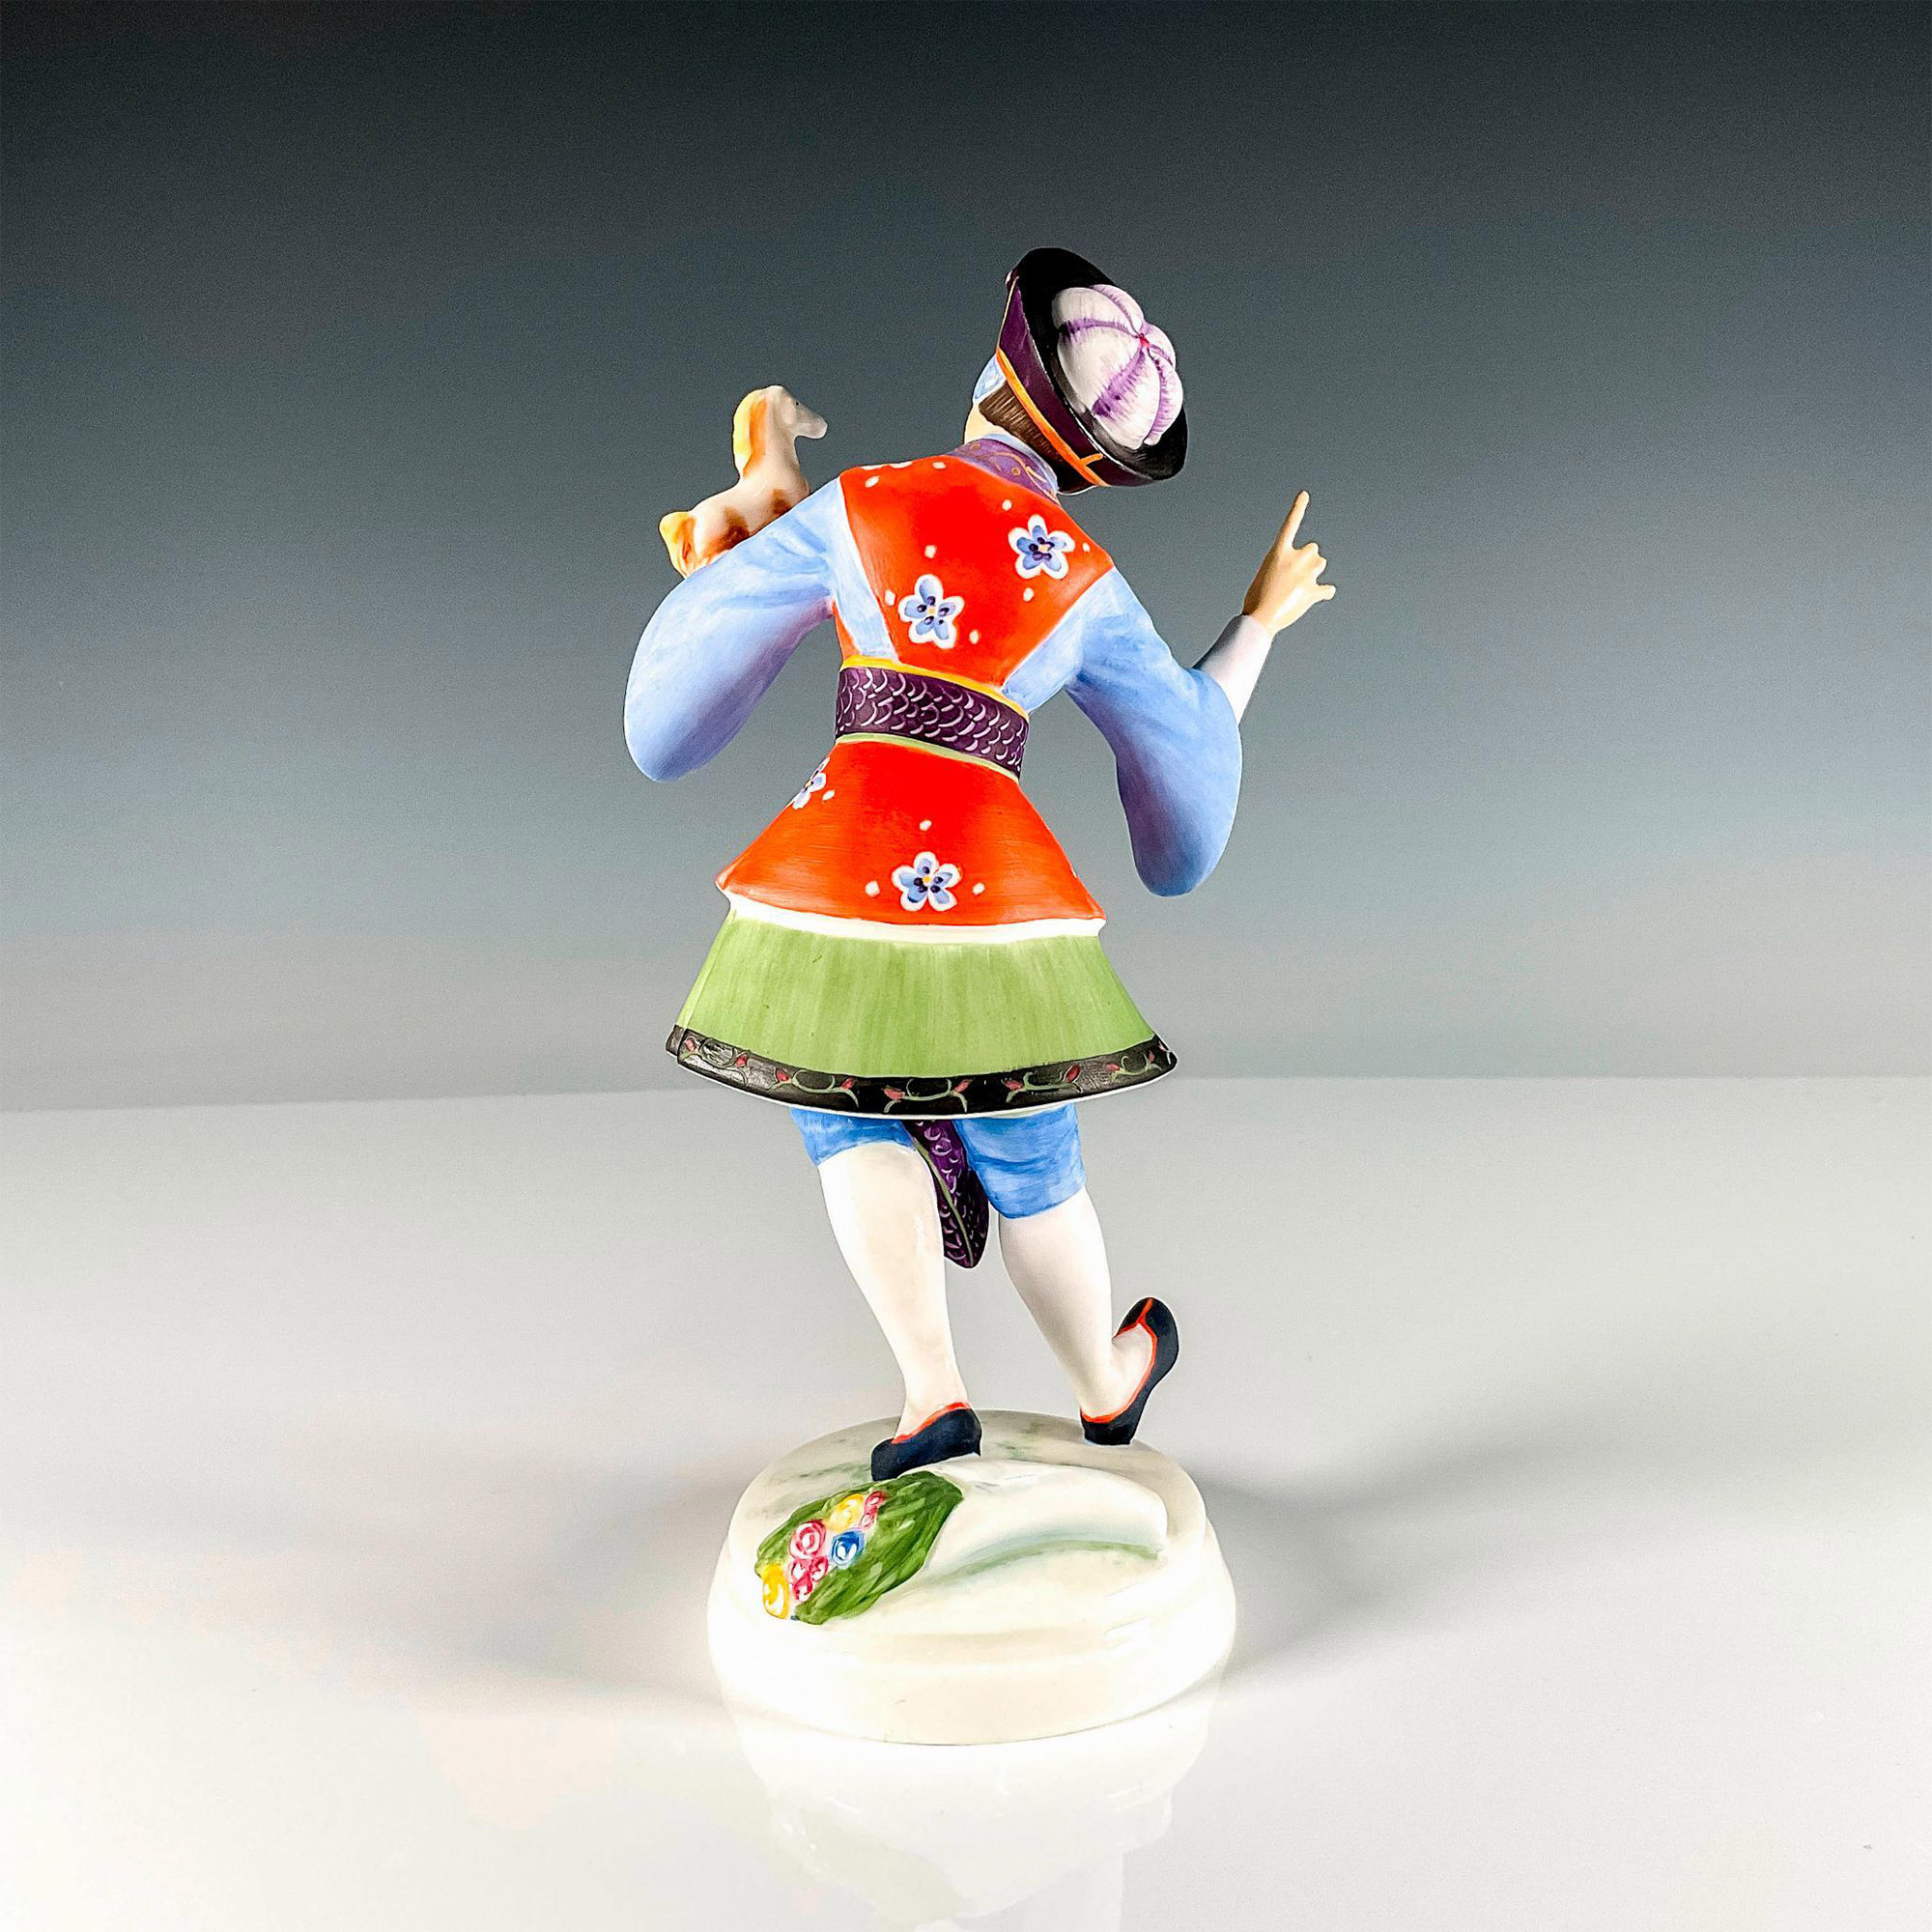 Chinese Dancer - HN2840 - Royal Doulton Figurine - Image 2 of 3